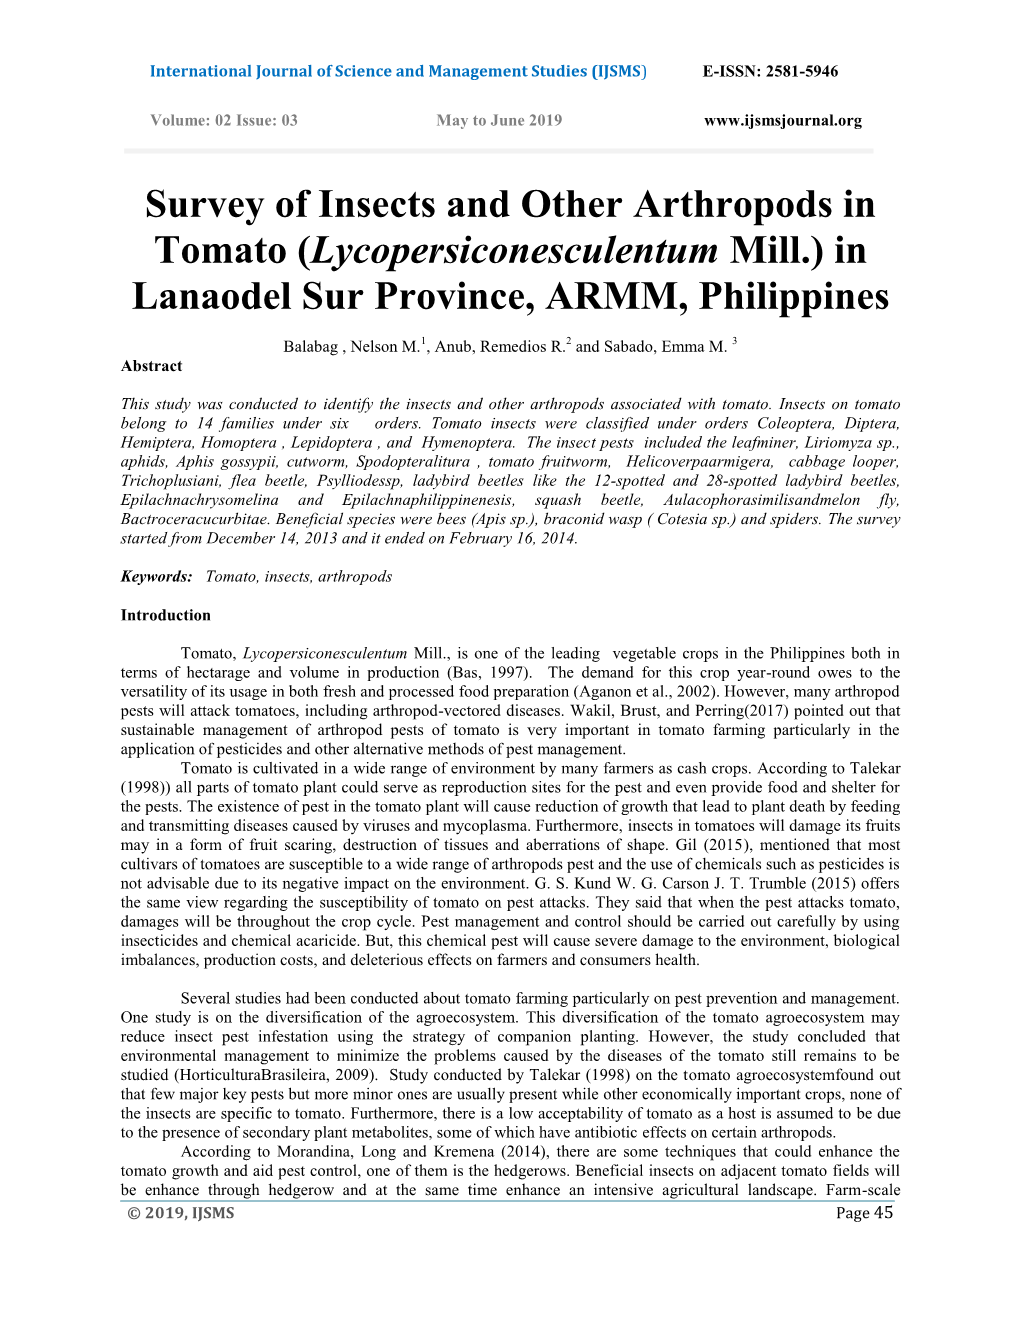 Survey of Insects and Other Arthropods in Tomato (Lycopersiconesculentum Mill.) in Lanaodel Sur Province, ARMM, Philippines